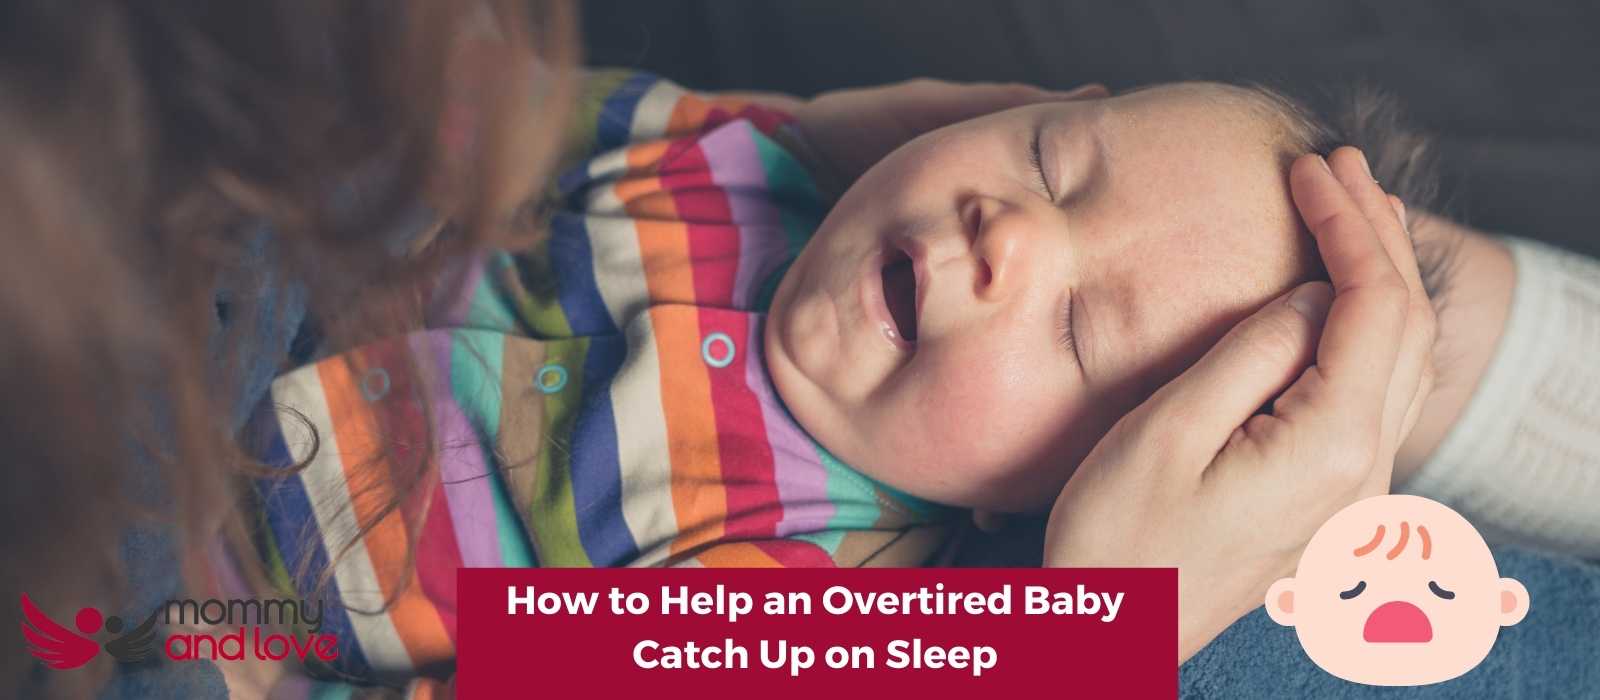 How to Help an Overtired Baby Catch Up on Sleep